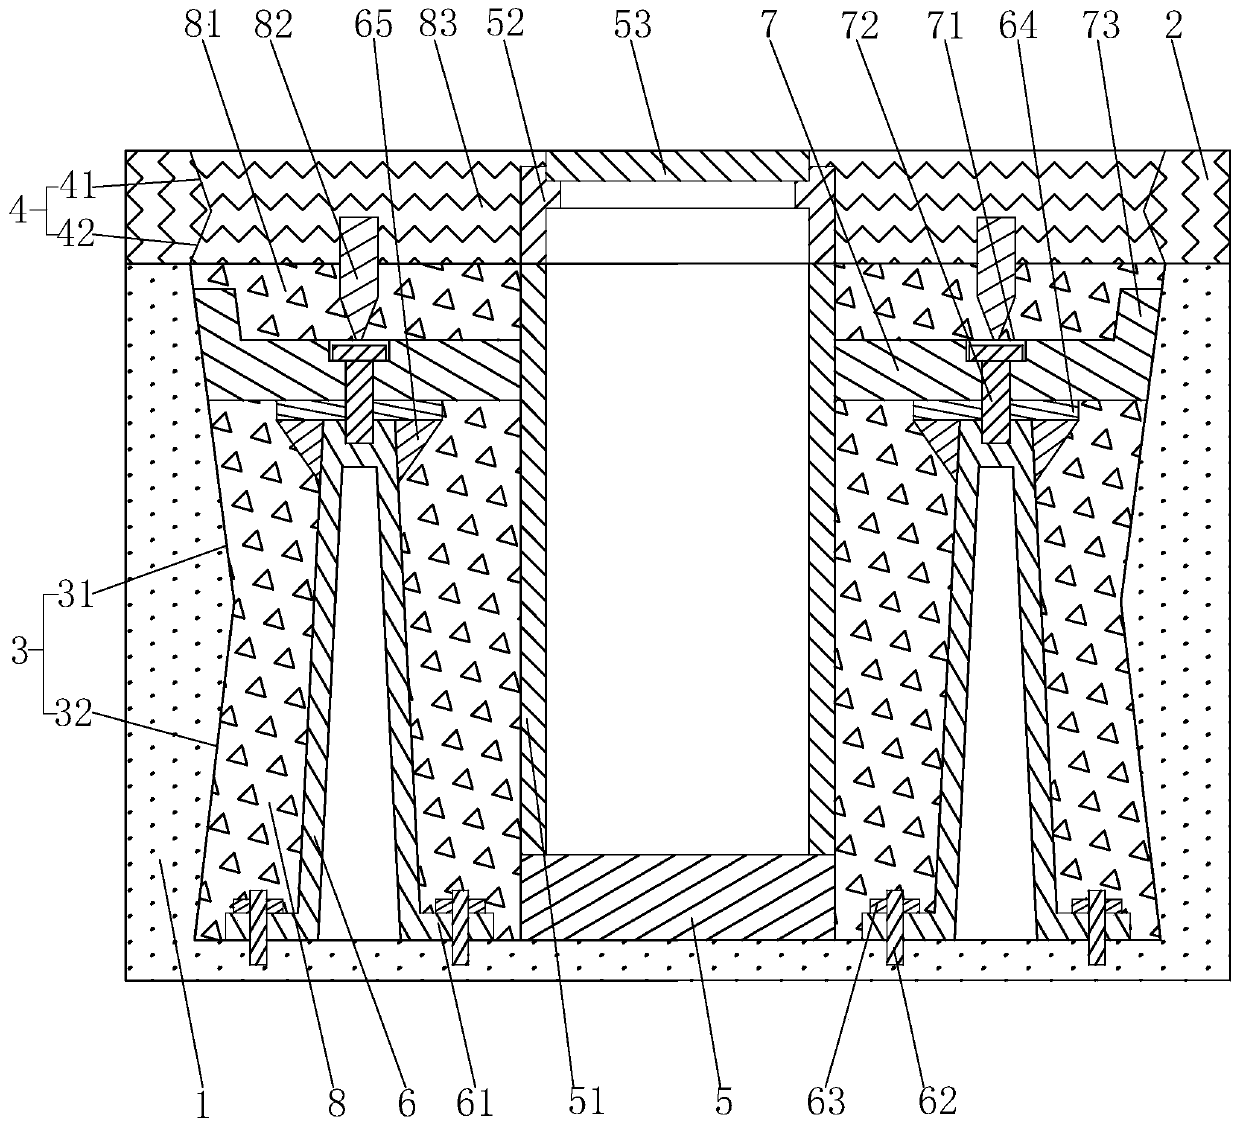 Inspection well installation structure and construction method